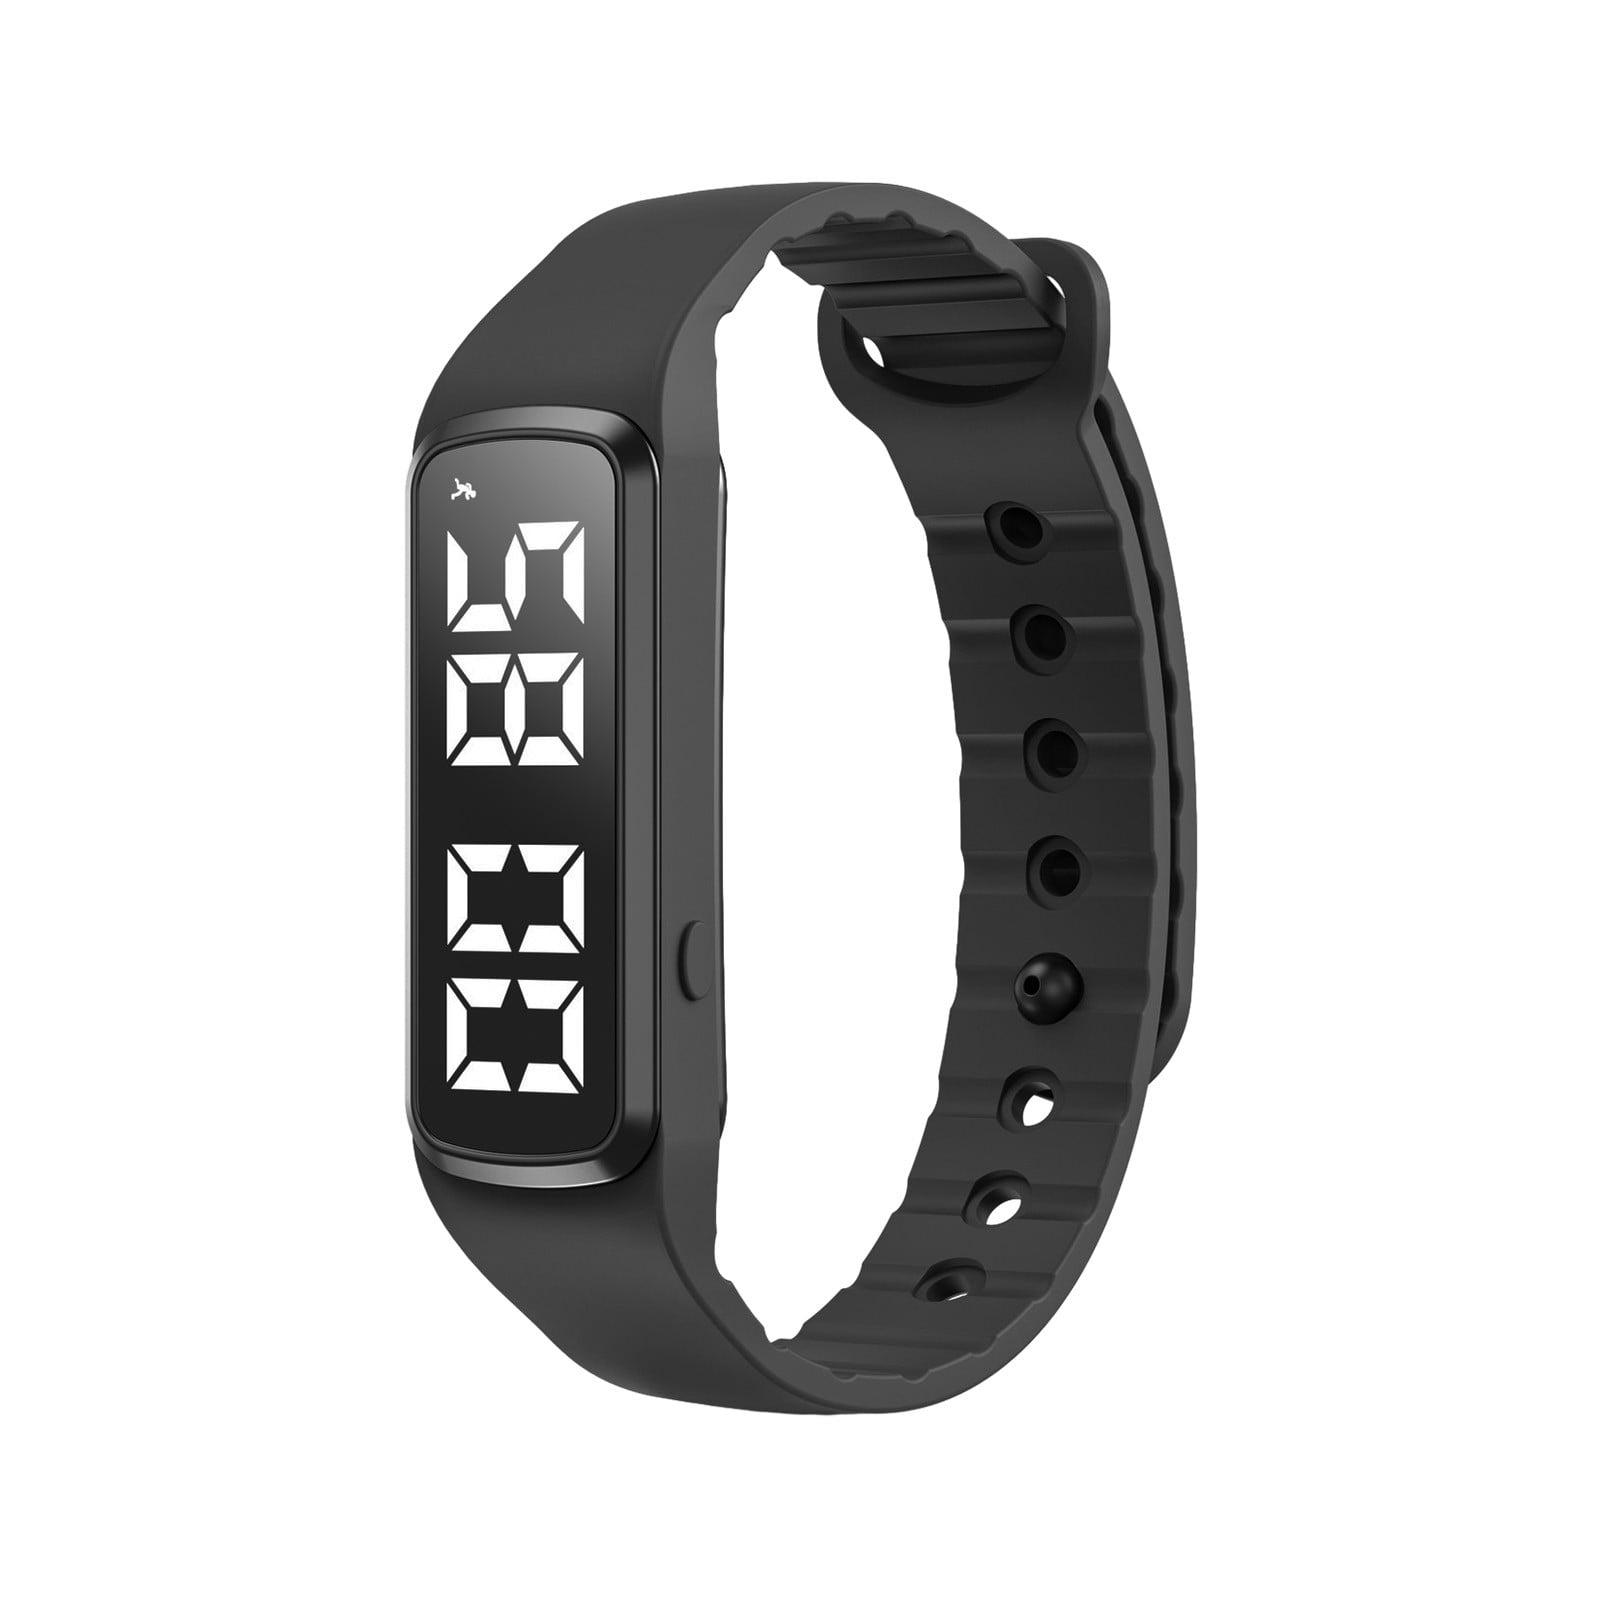 Smart Fitness Tracker Ion Bracelet With Step Counter, Activity Monitor,  Alarm Clock, And Vibration For IPhone And Android From Better_goods, $14.57  | DHgate.Com